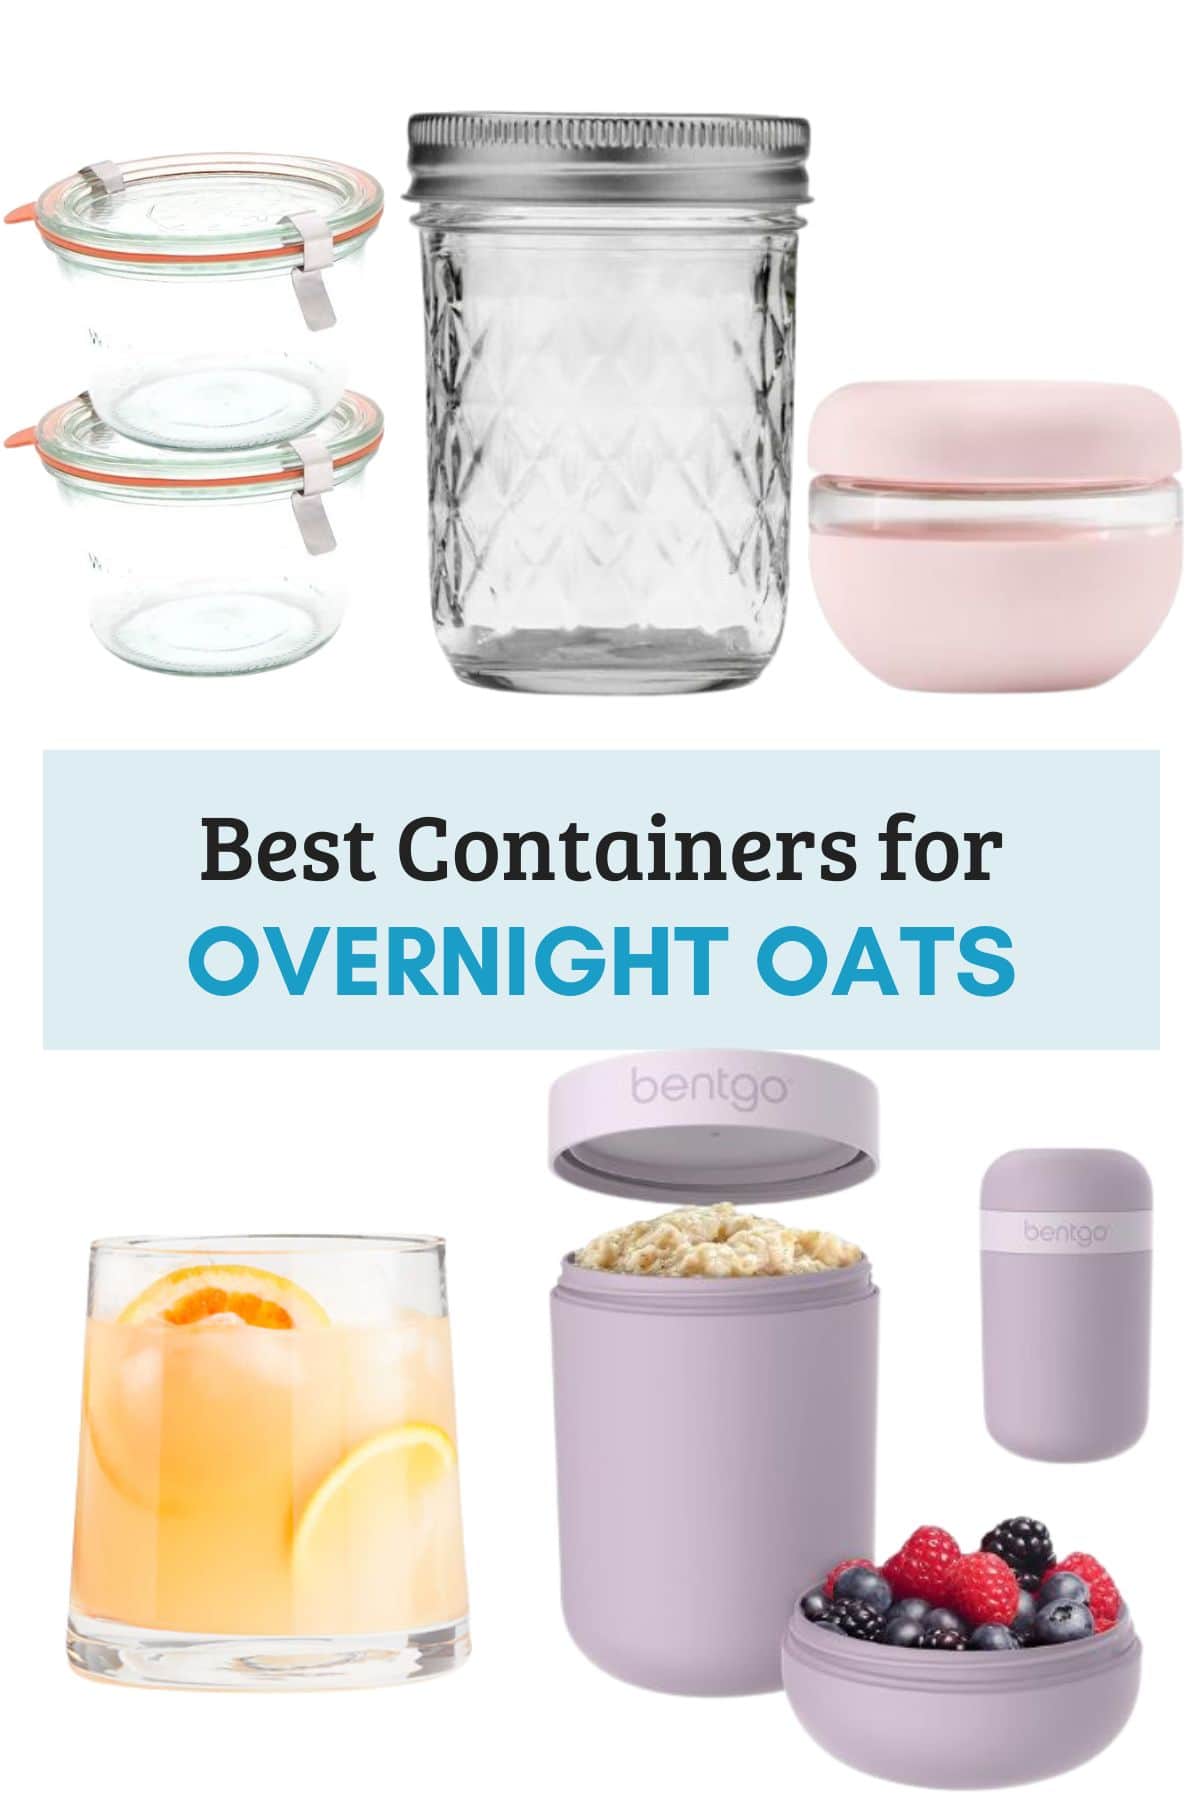 Best containers for overnight oats.